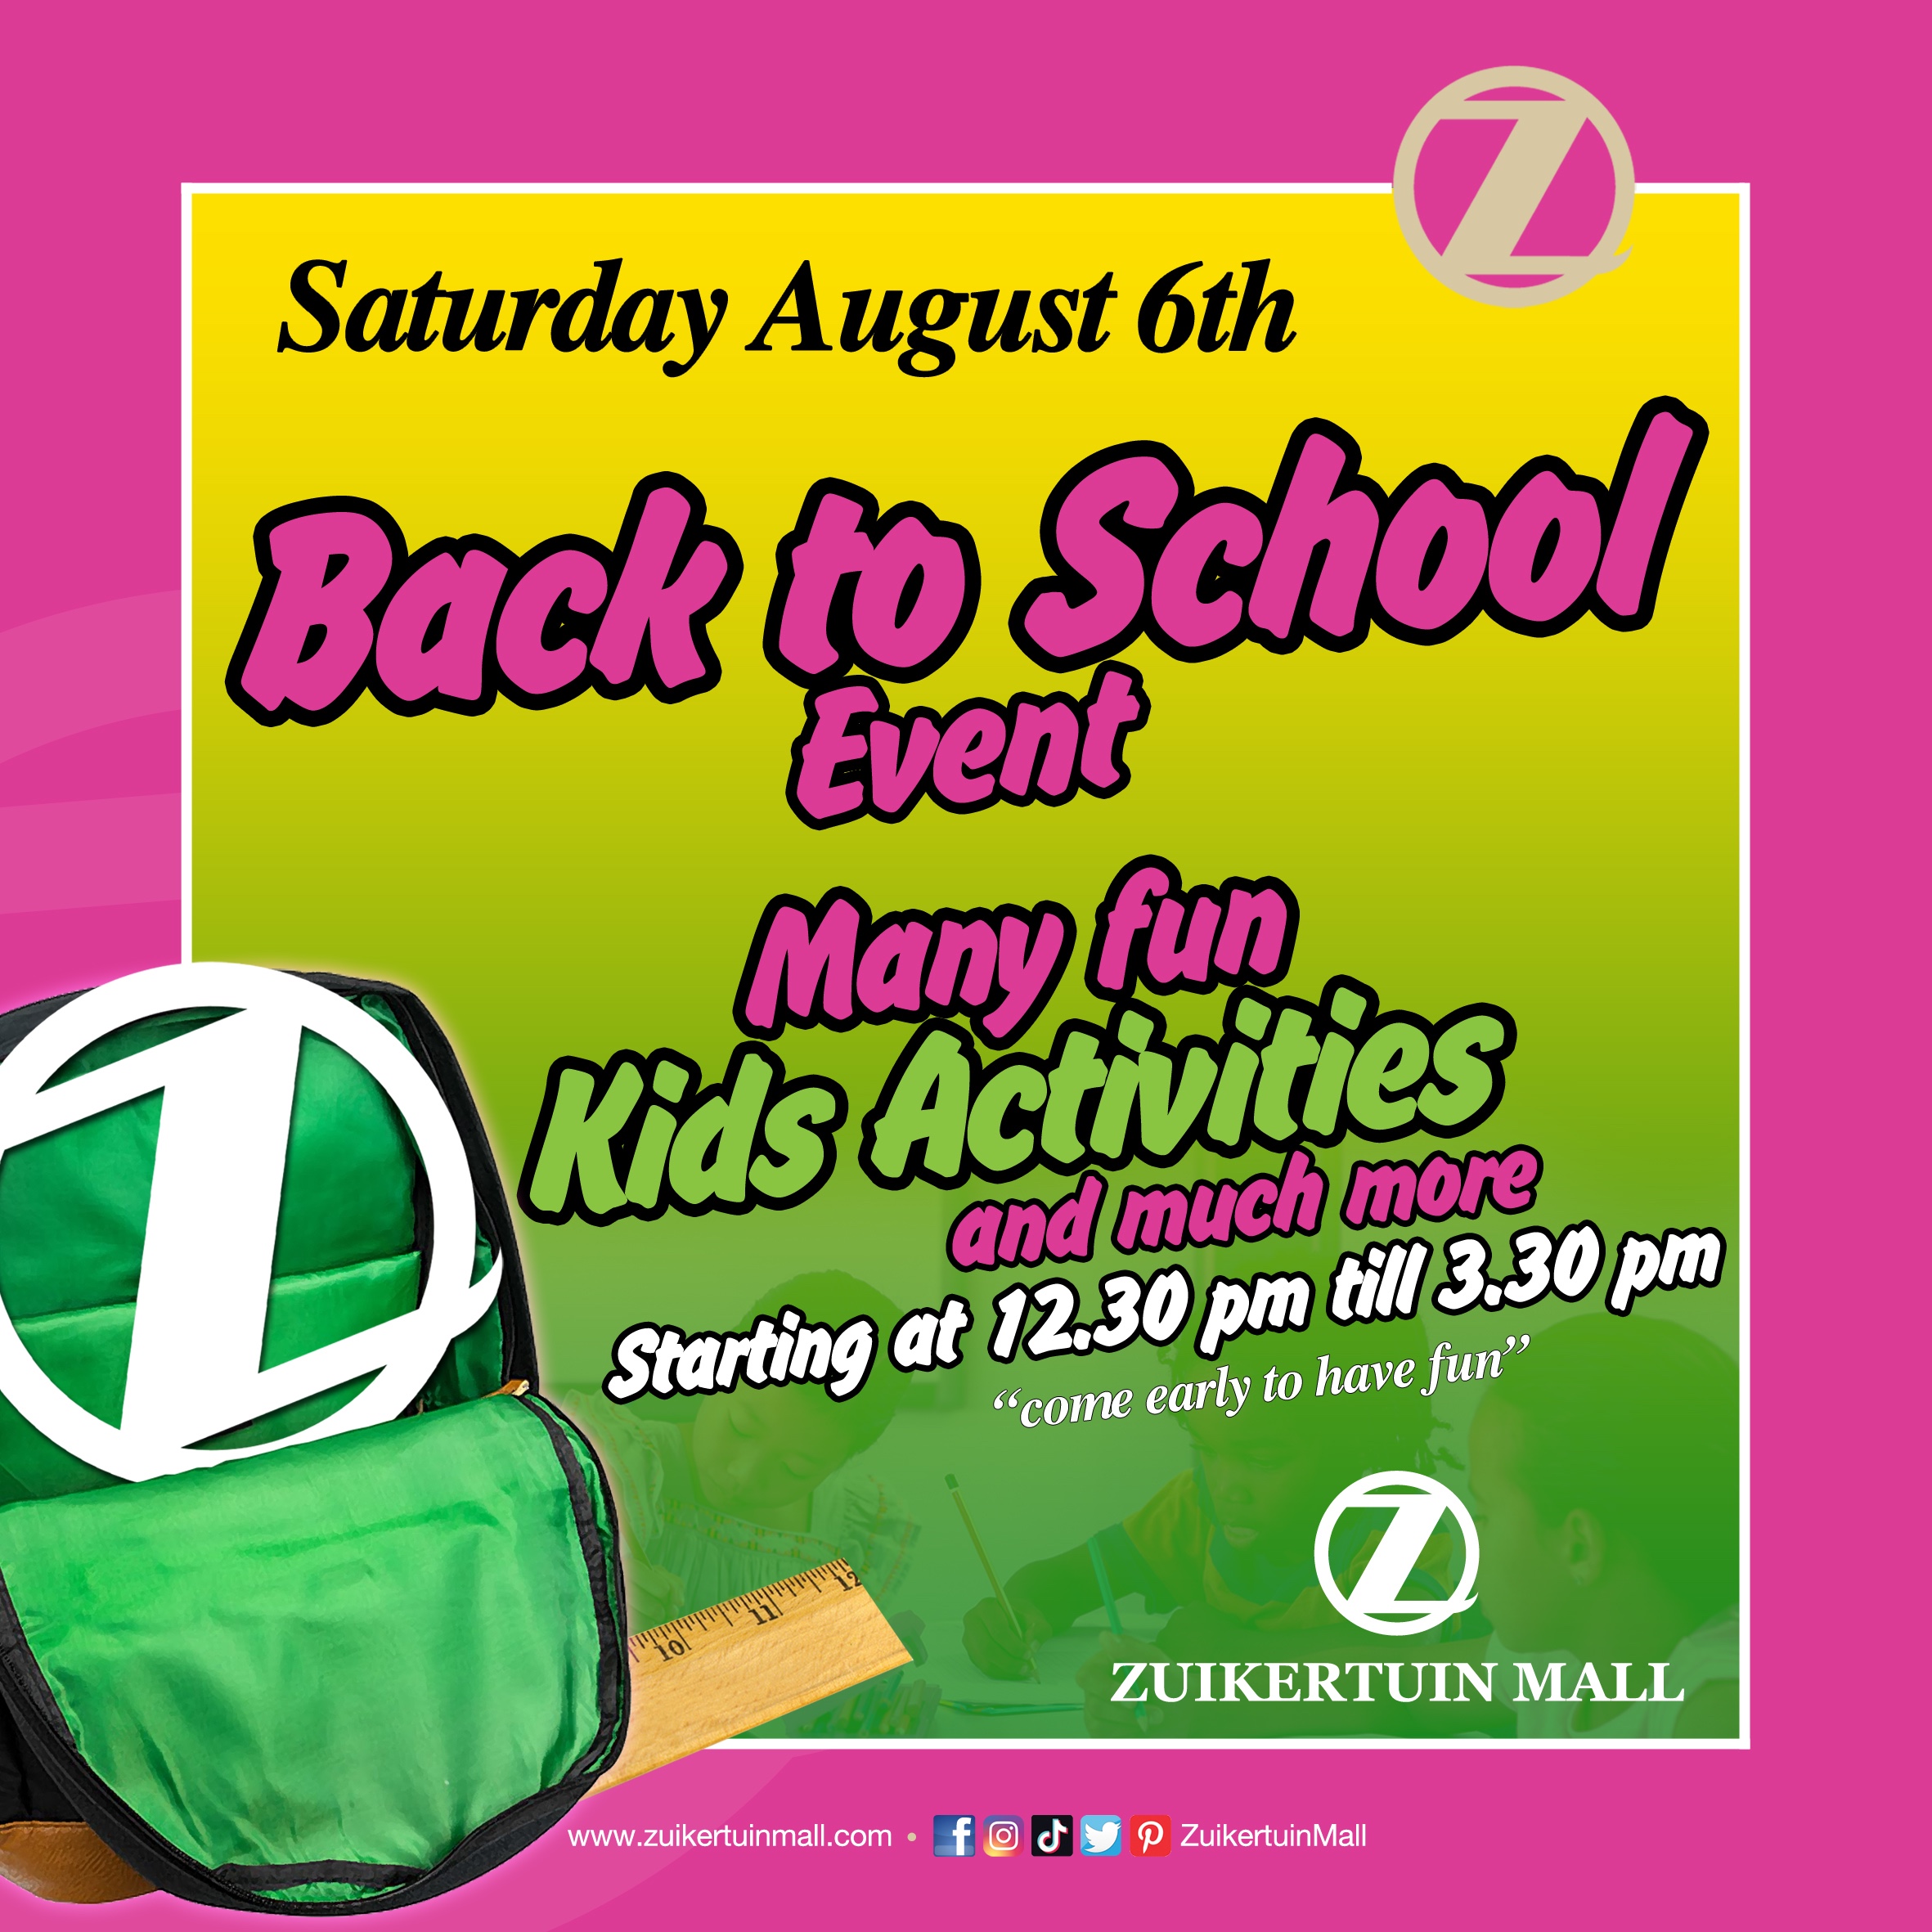 Back to school event Saturday August 6th